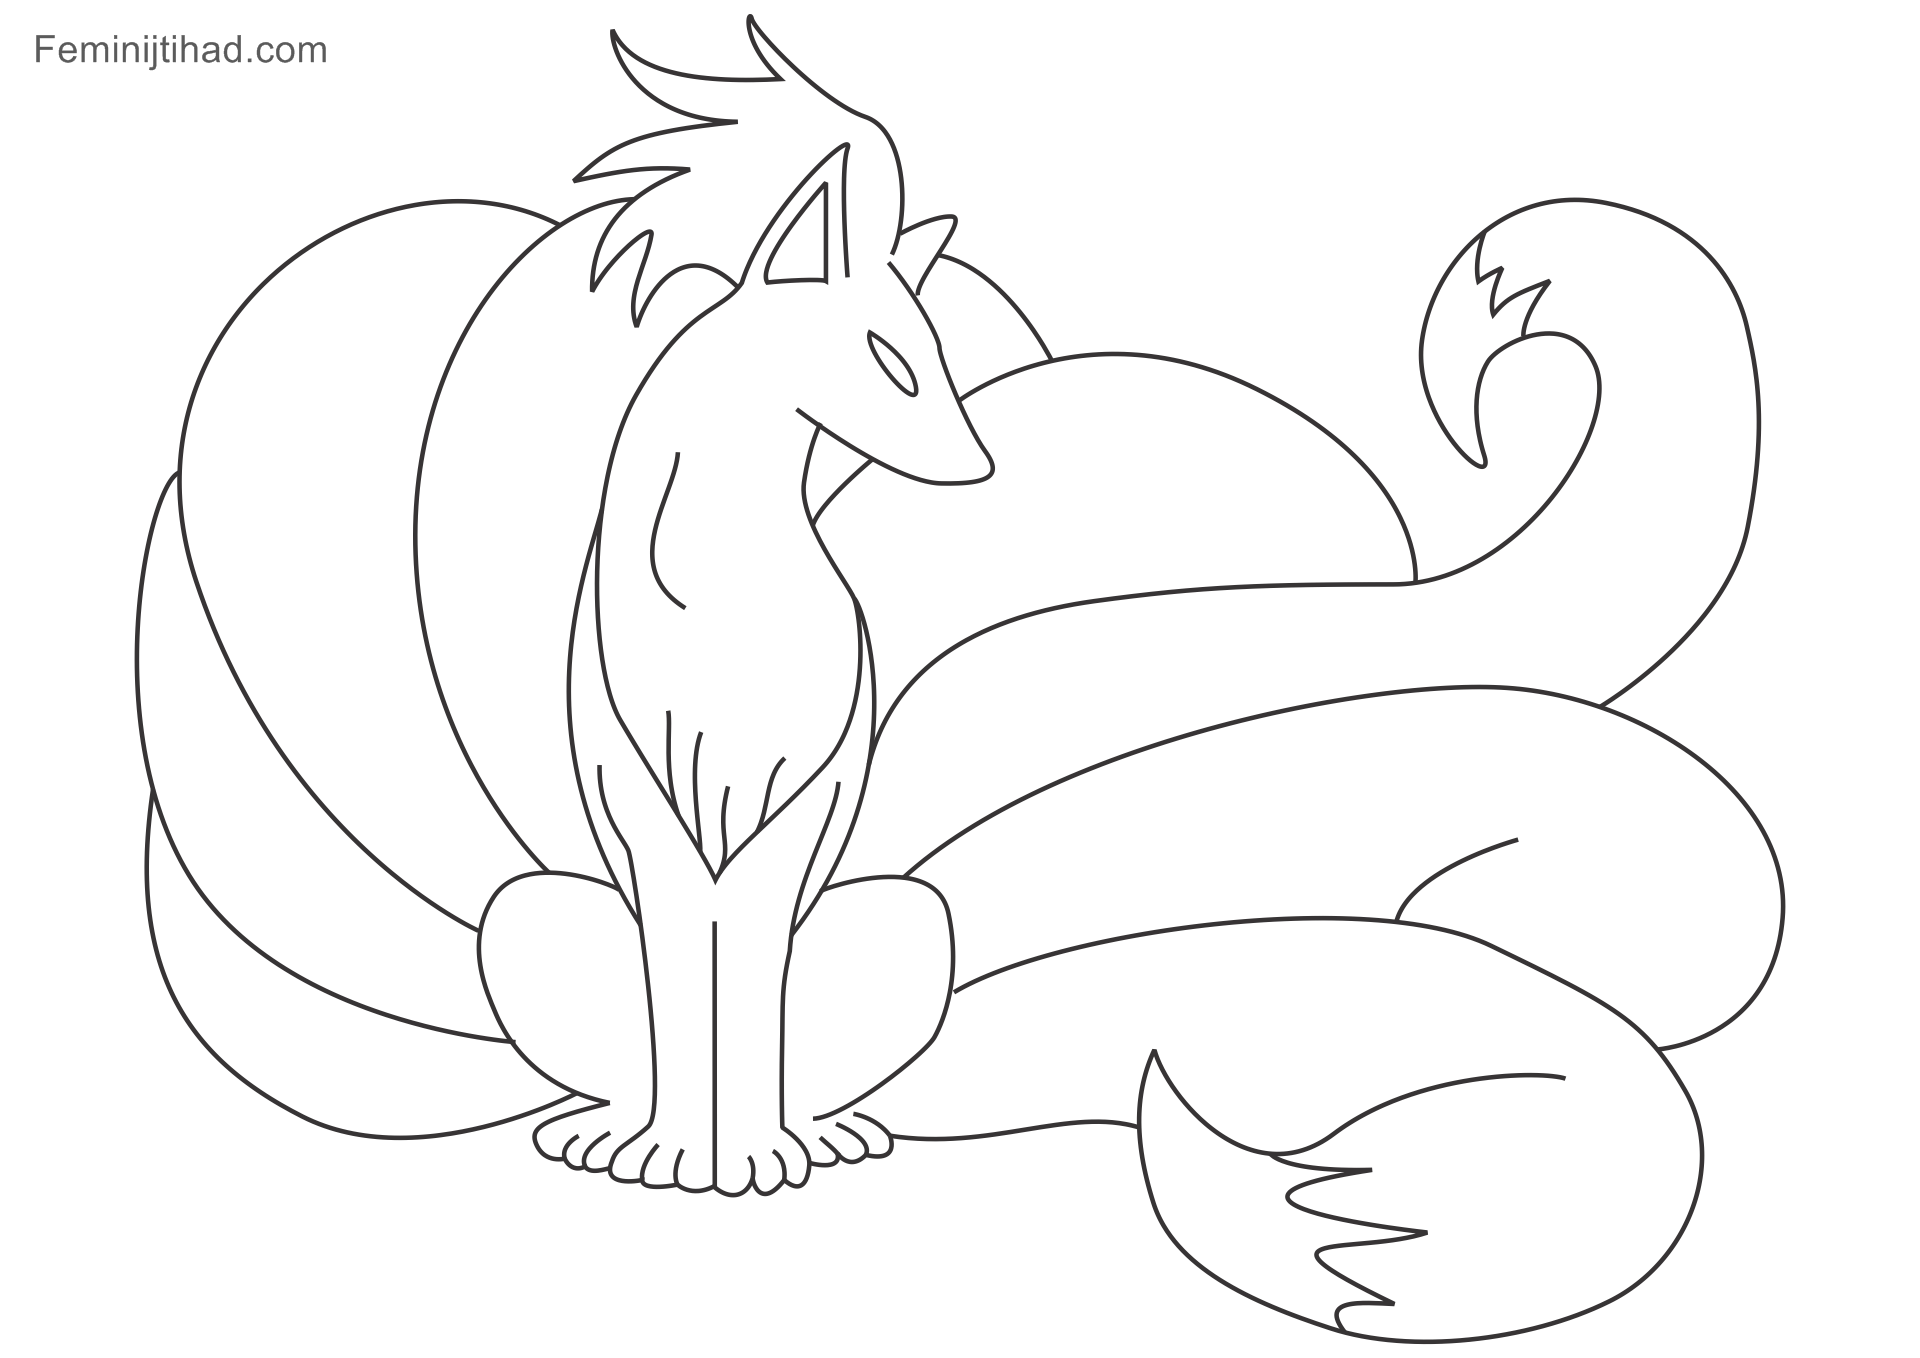 Pokemon Coloring Pages Vulpix At Free Printable